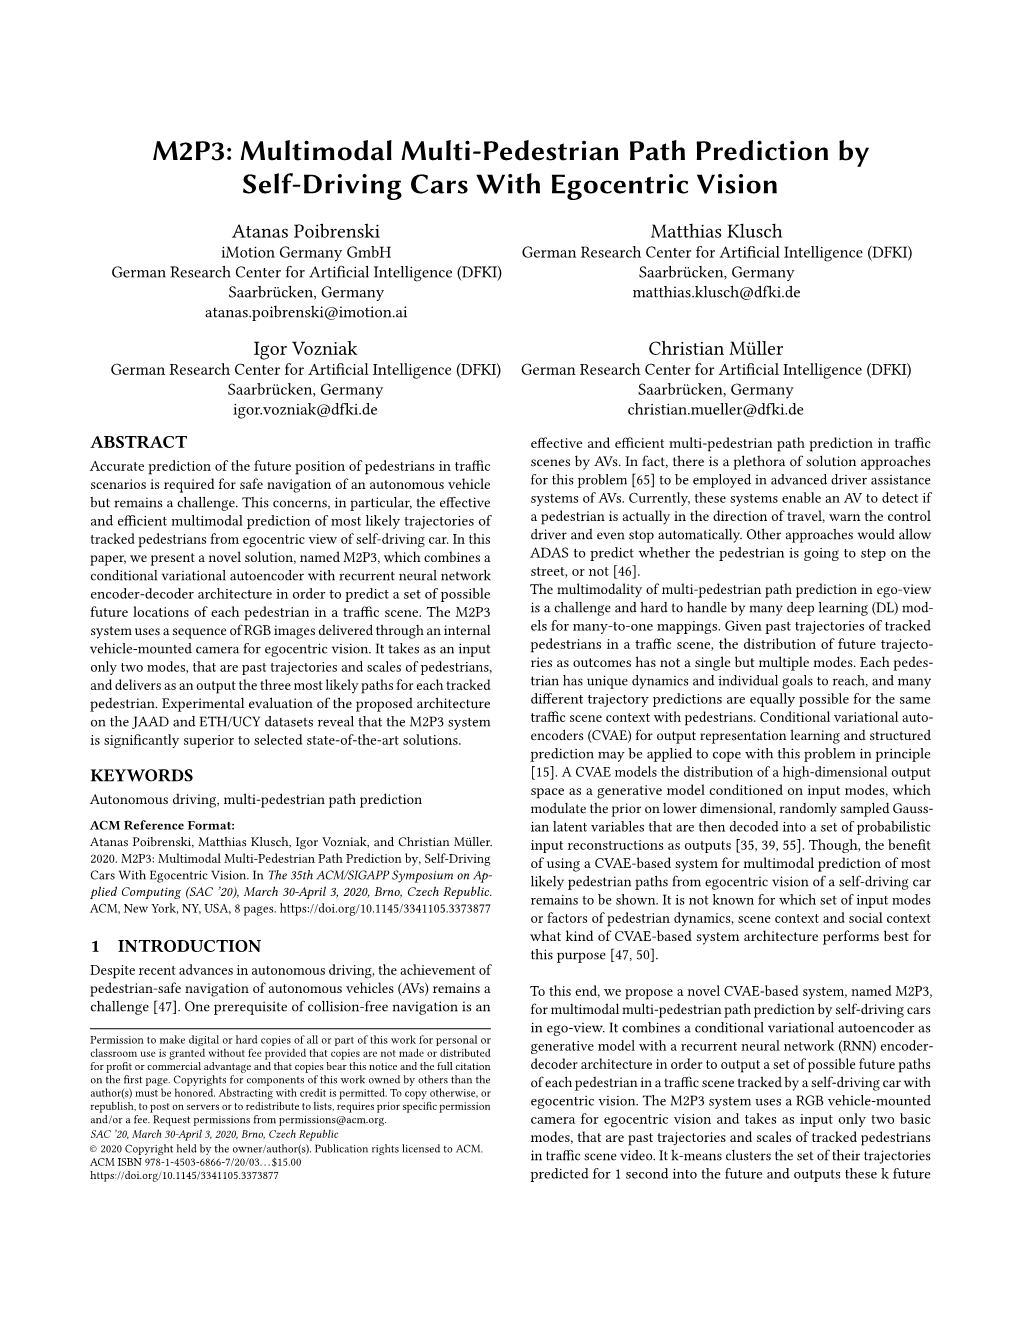 M2P3: Multimodal Multi-Pedestrian Path Prediction by Self-Driving Cars with Egocentric Vision